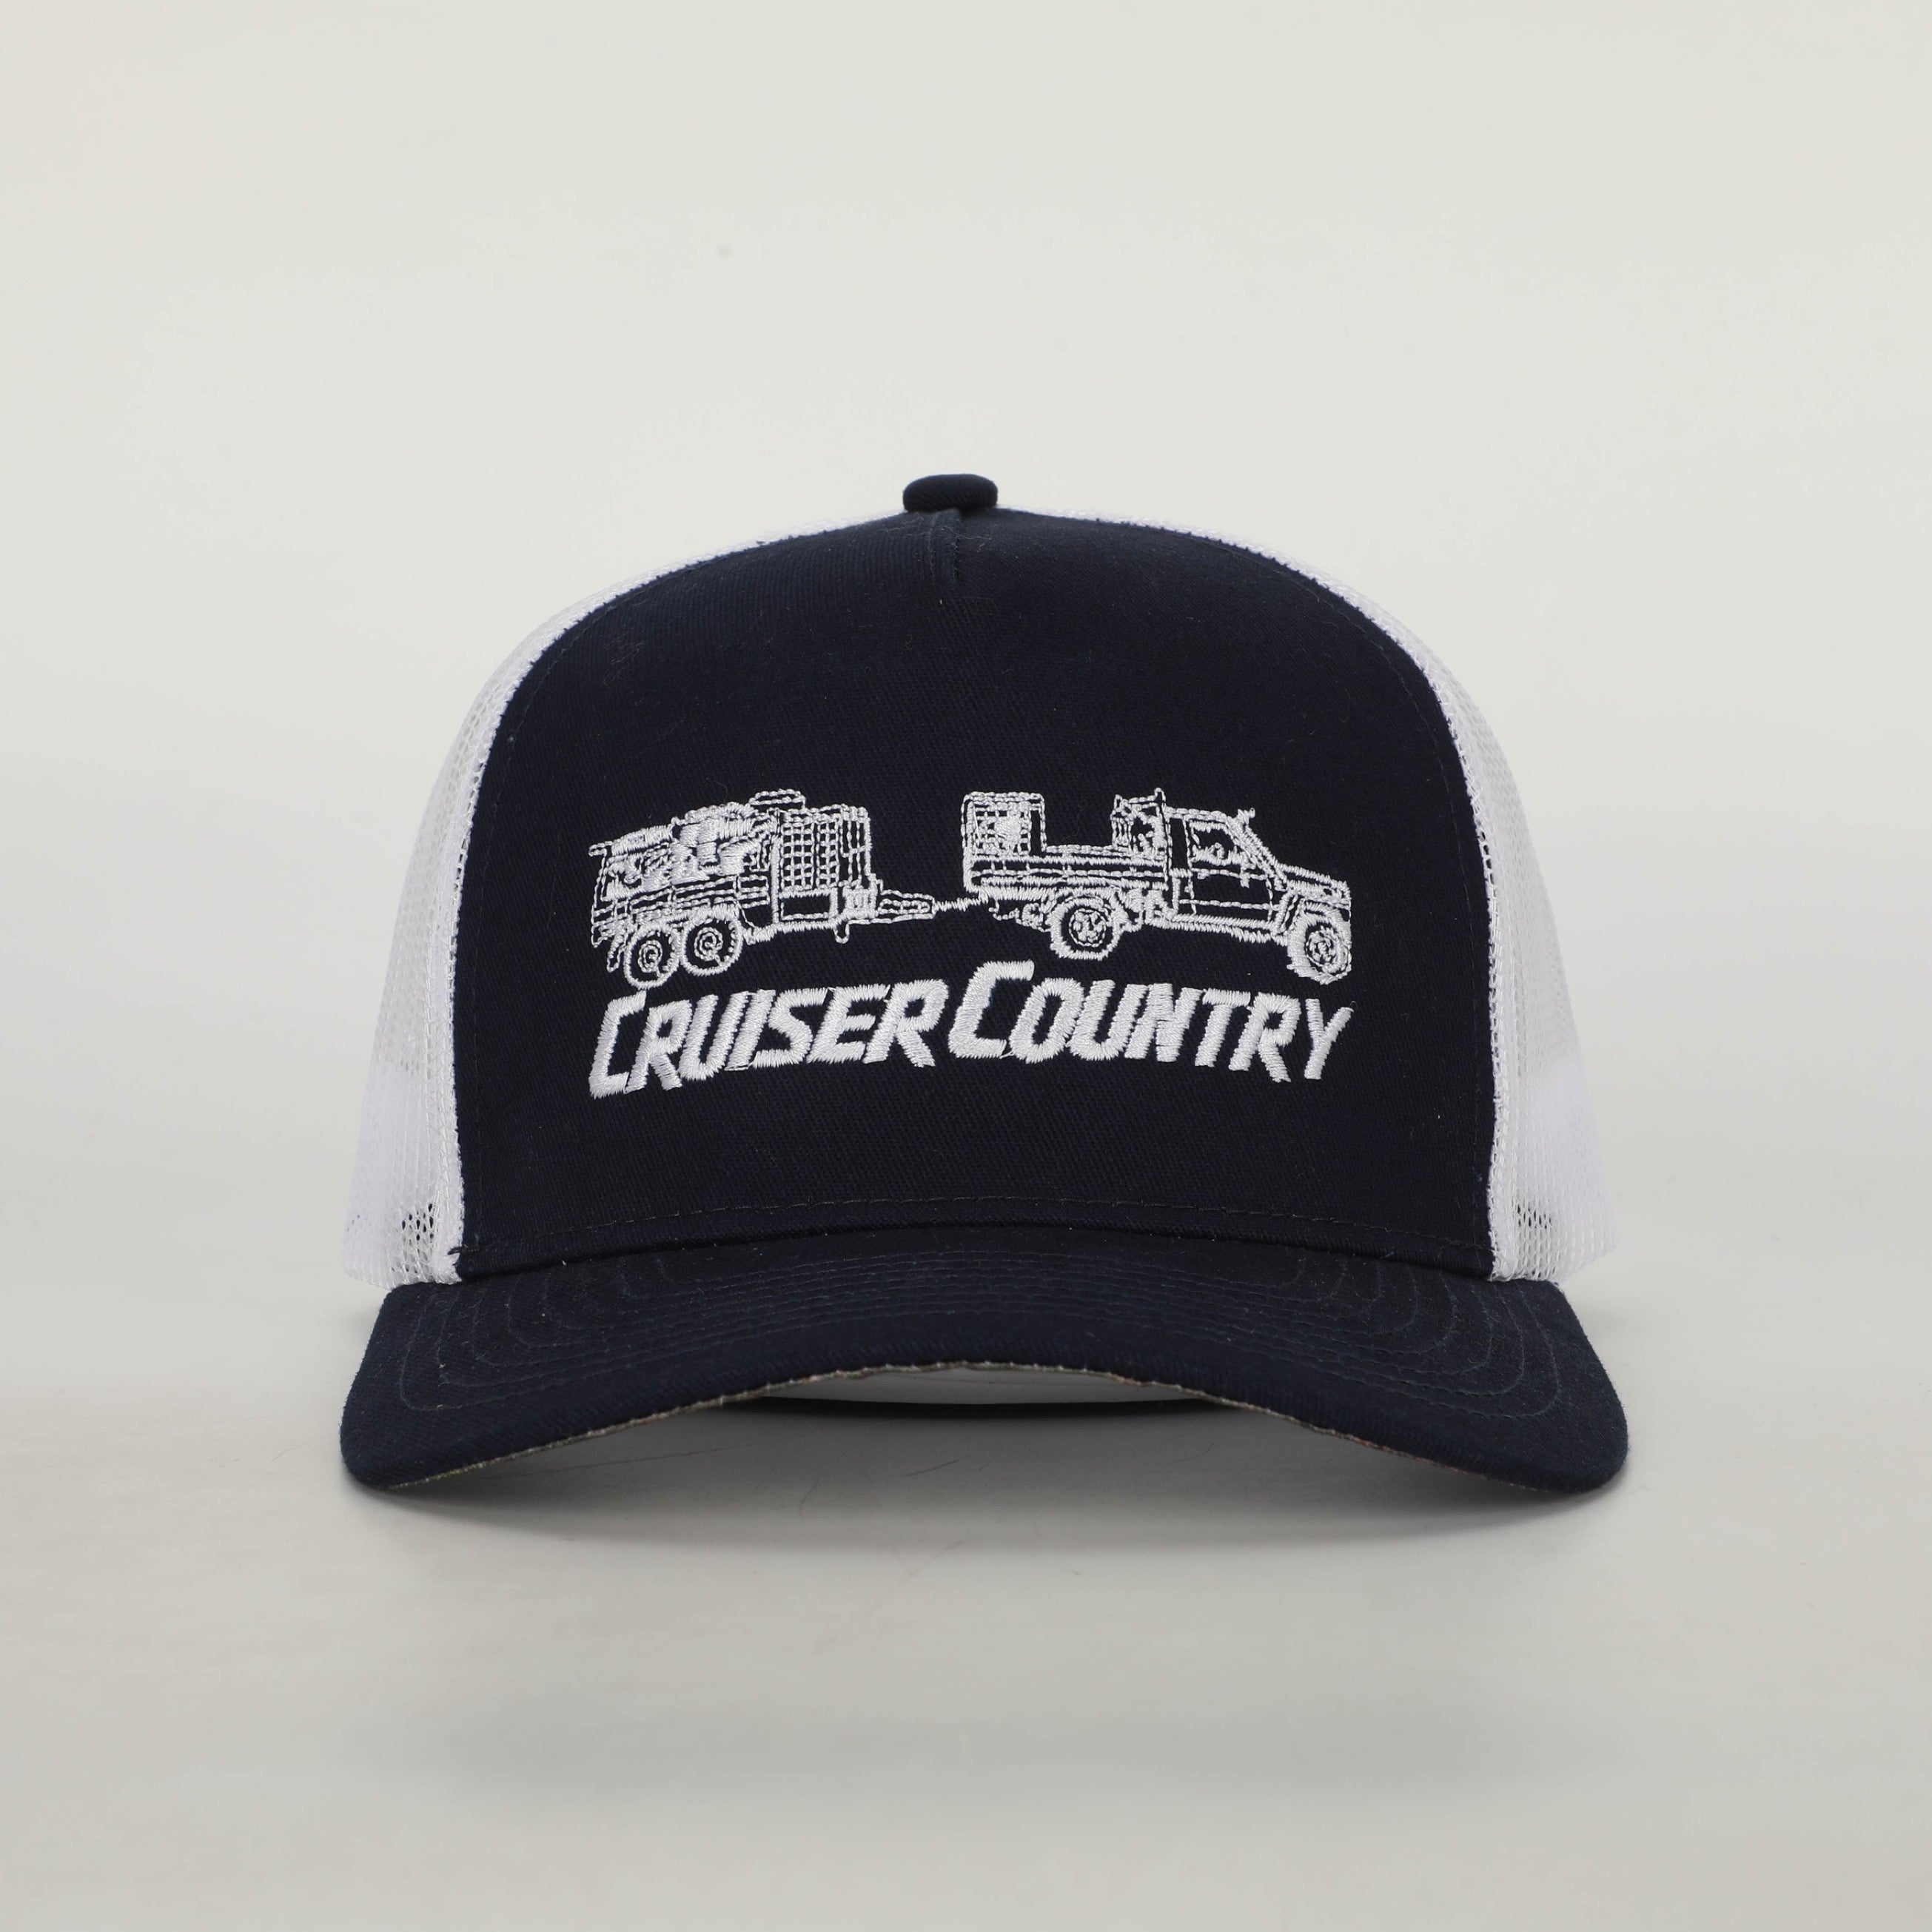 Cruiser Country - Truckers Hat NAVY - Hogs Dogs Quads Shop